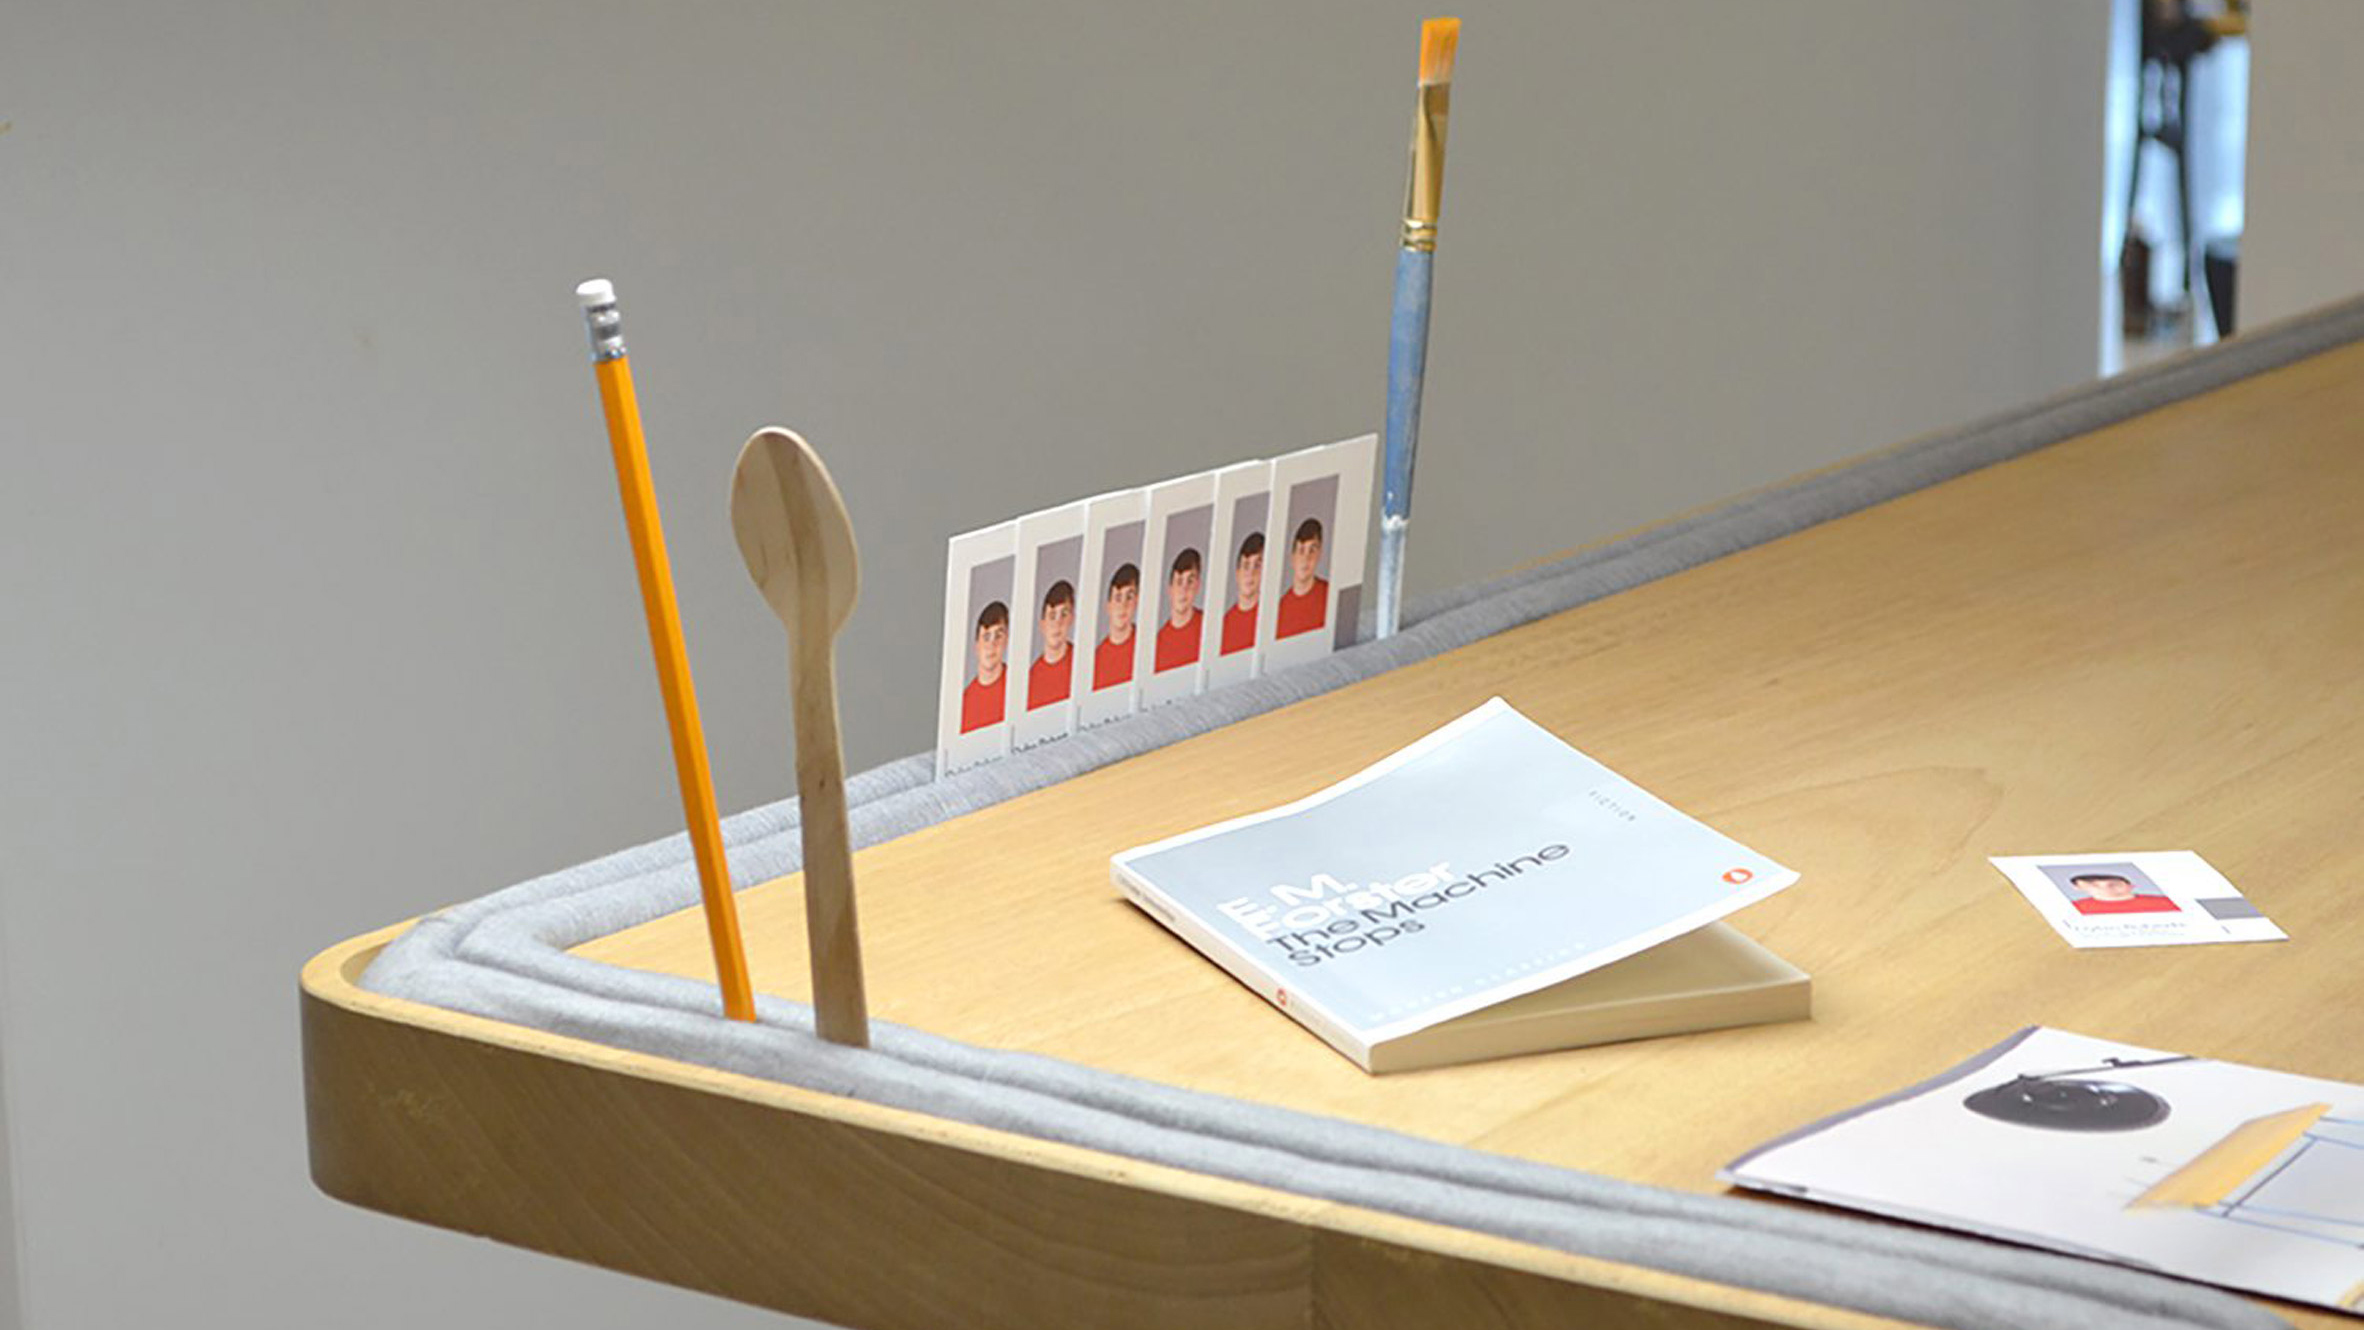 Photograph showing desk with lip around edge to hold things